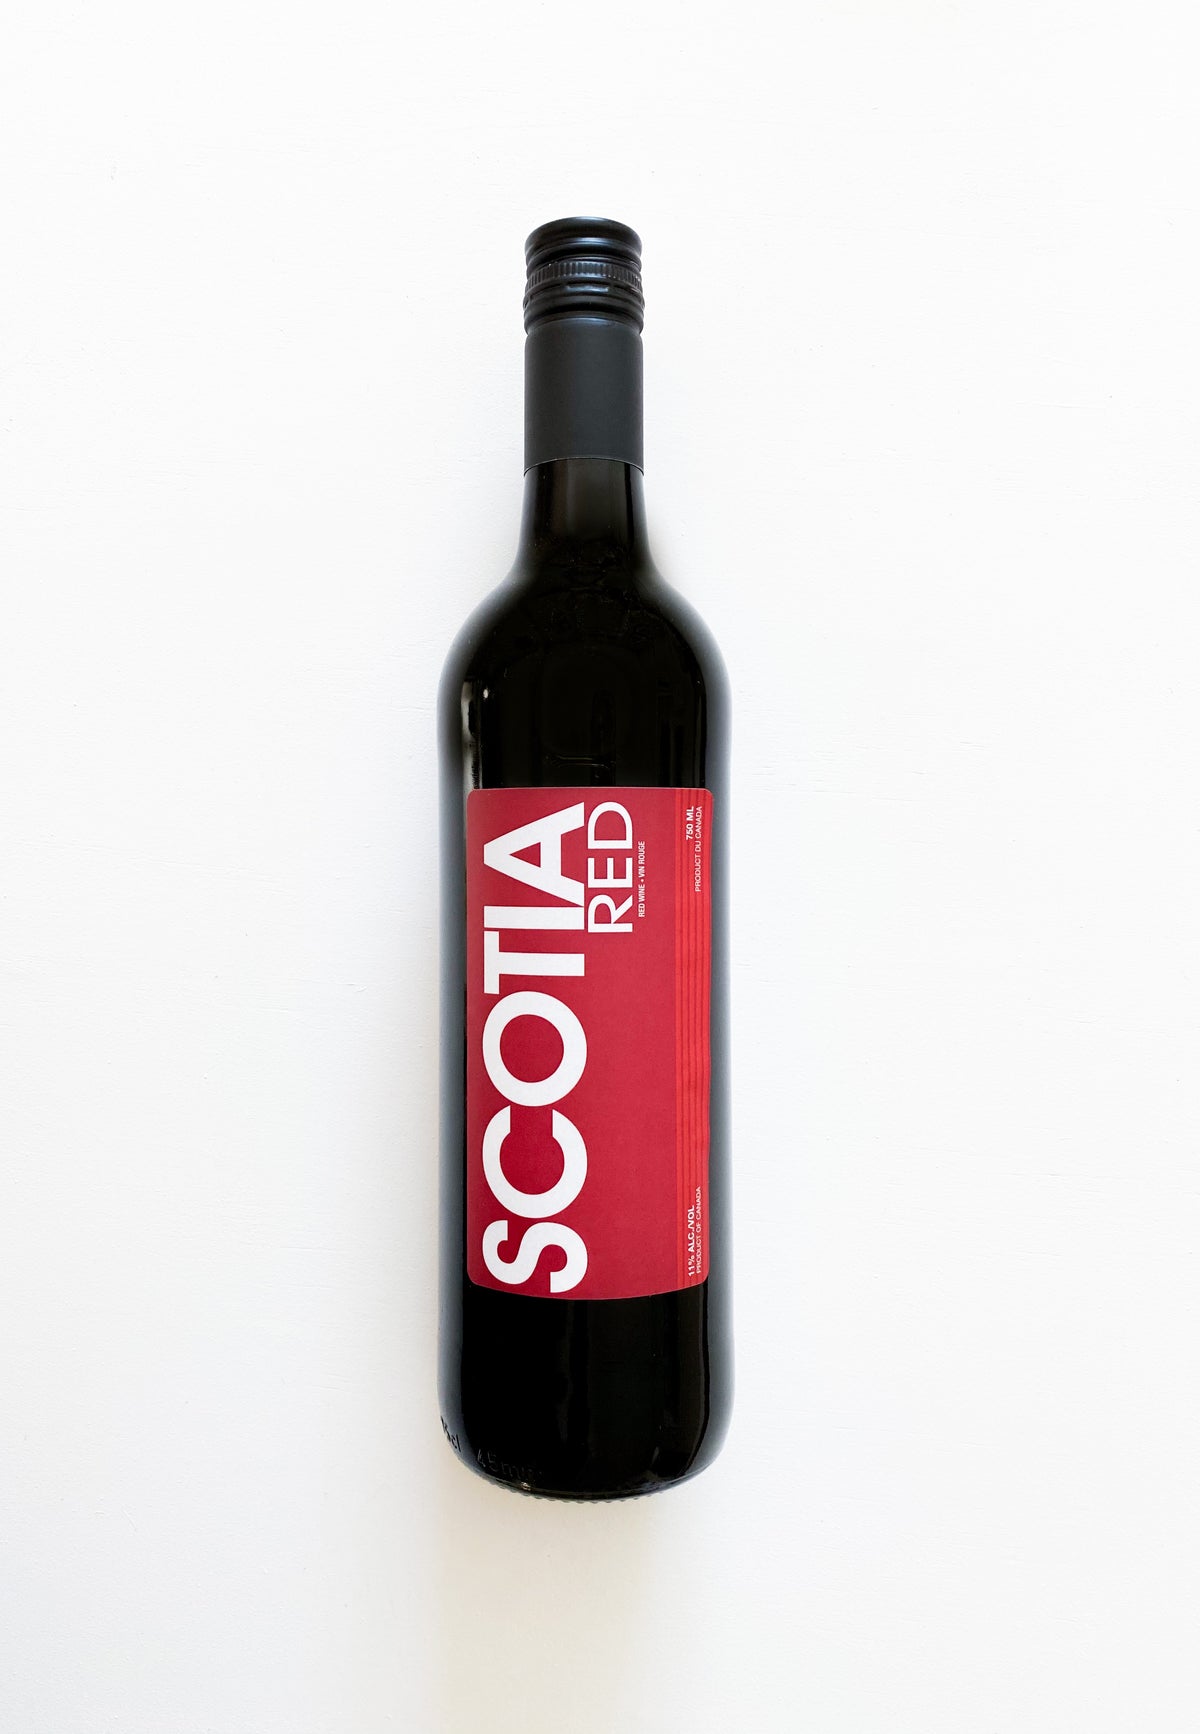 Bottle of Sainte-Famille Scotia Red.